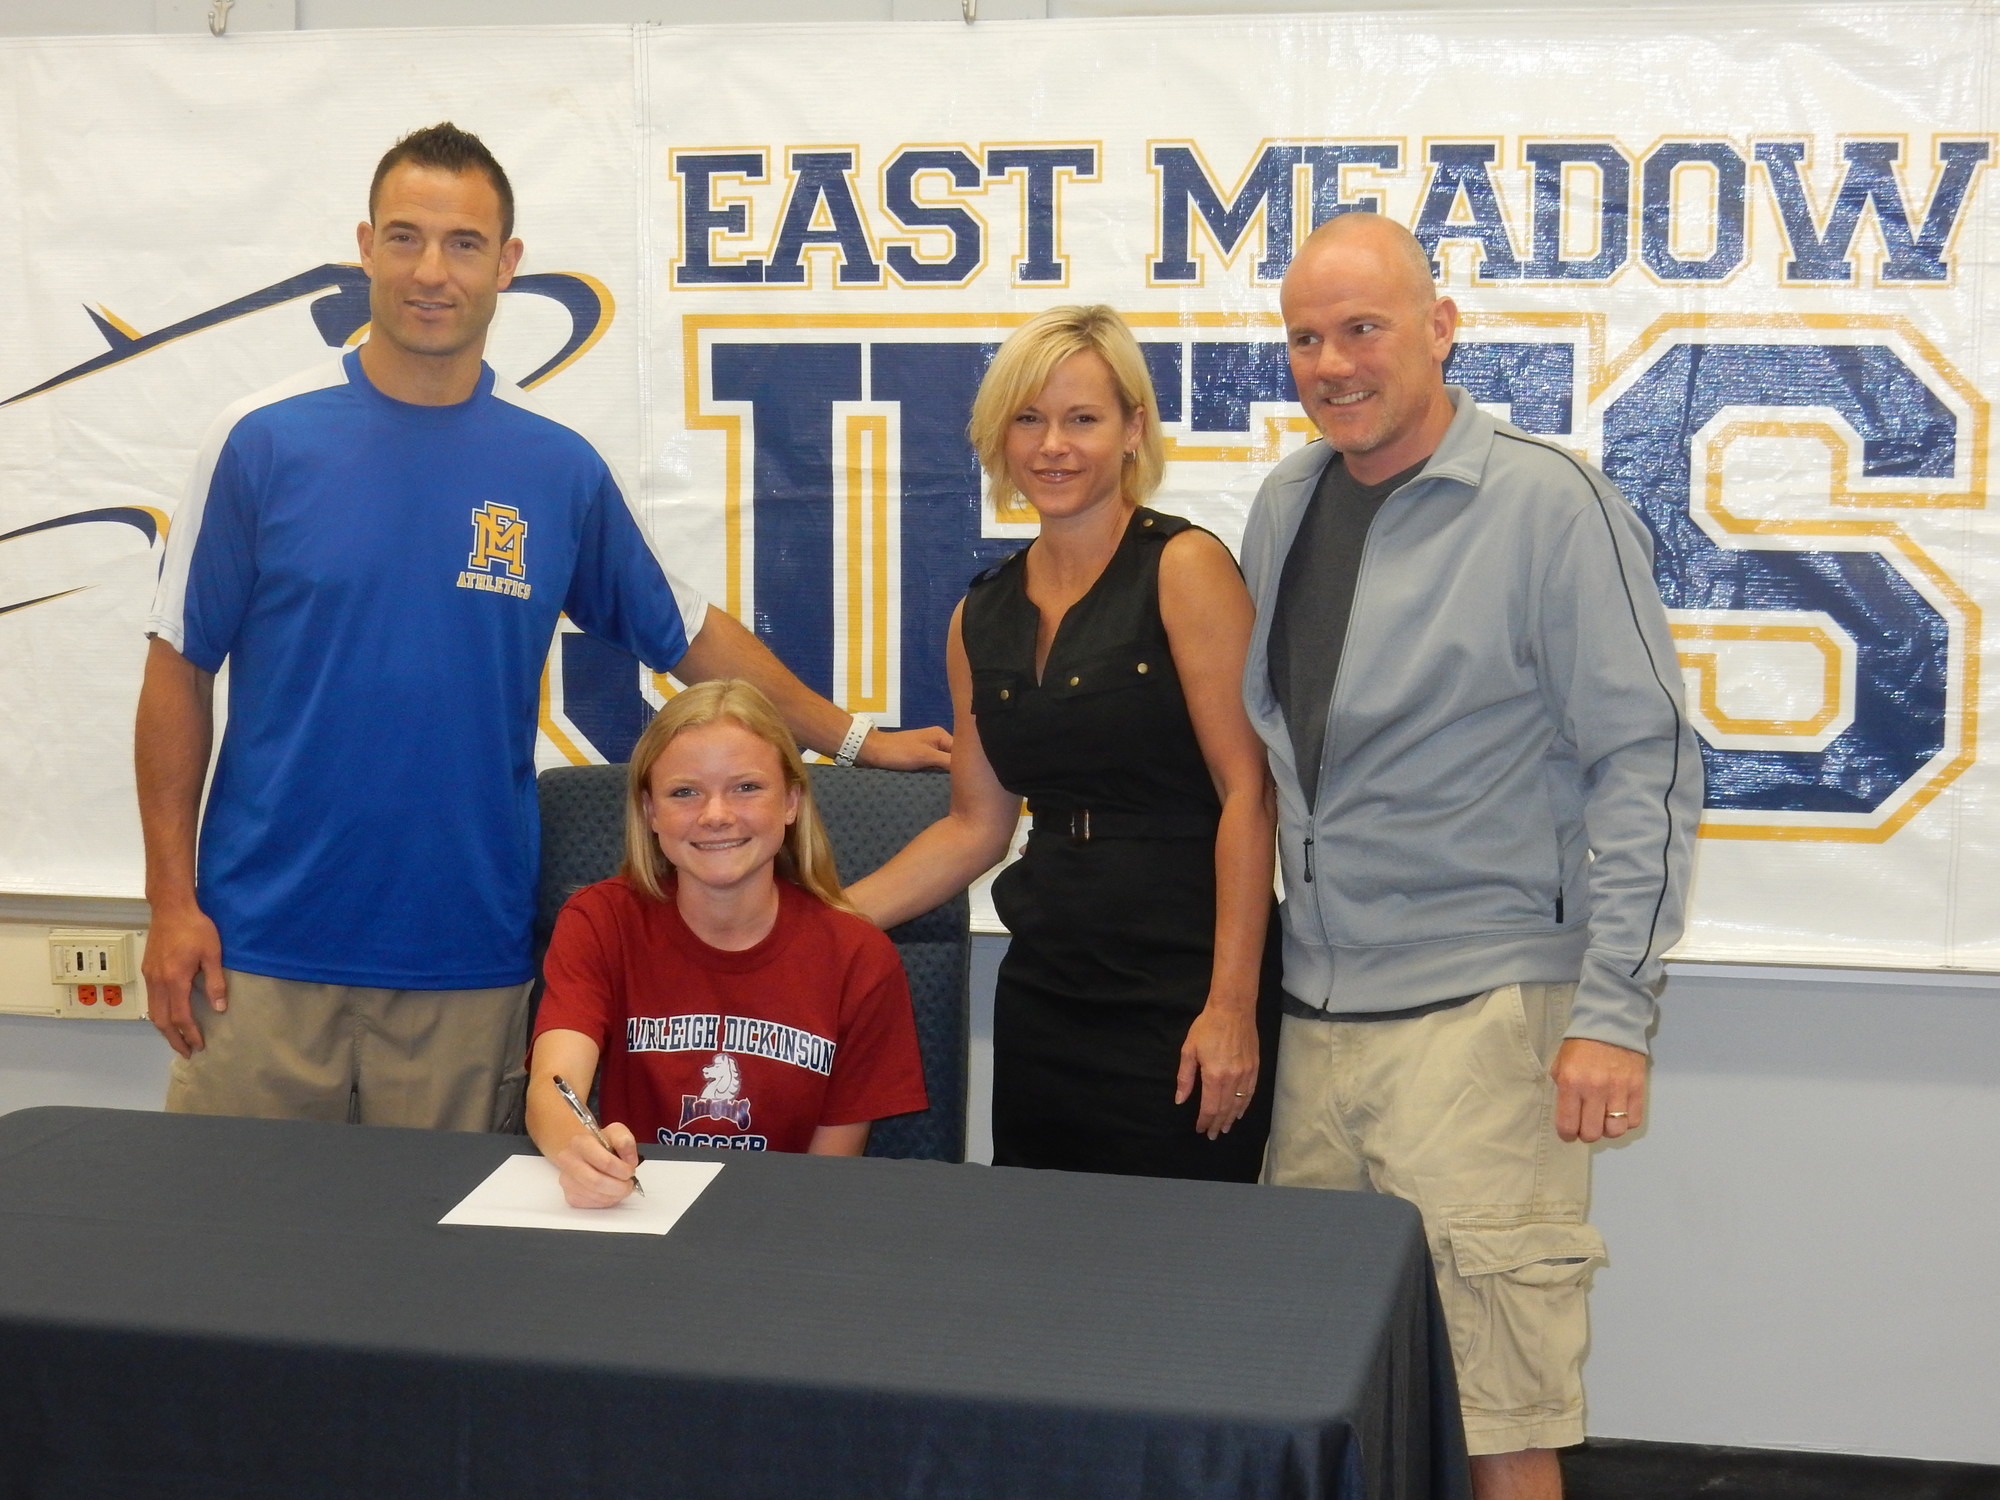 Nicole Keicher, surrounded by her soccer coach, Adam Hananel, left, and parents Jennifer and Wayne, will play soccer at Fairleigh Dickinson University.